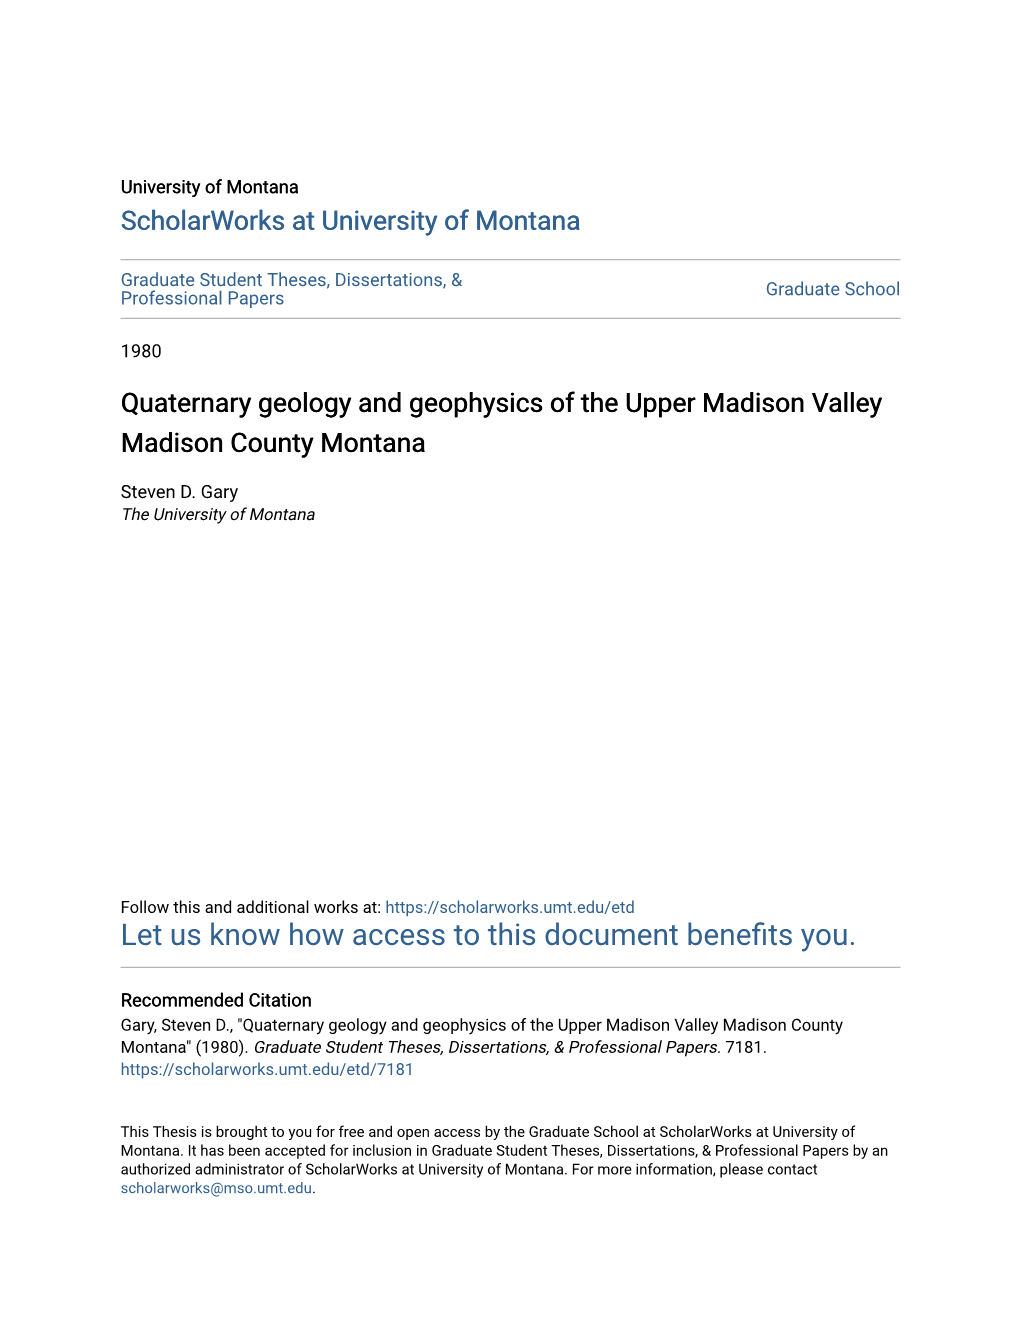 Quaternary Geology and Geophysics of the Upper Madison Valley Madison County Montana